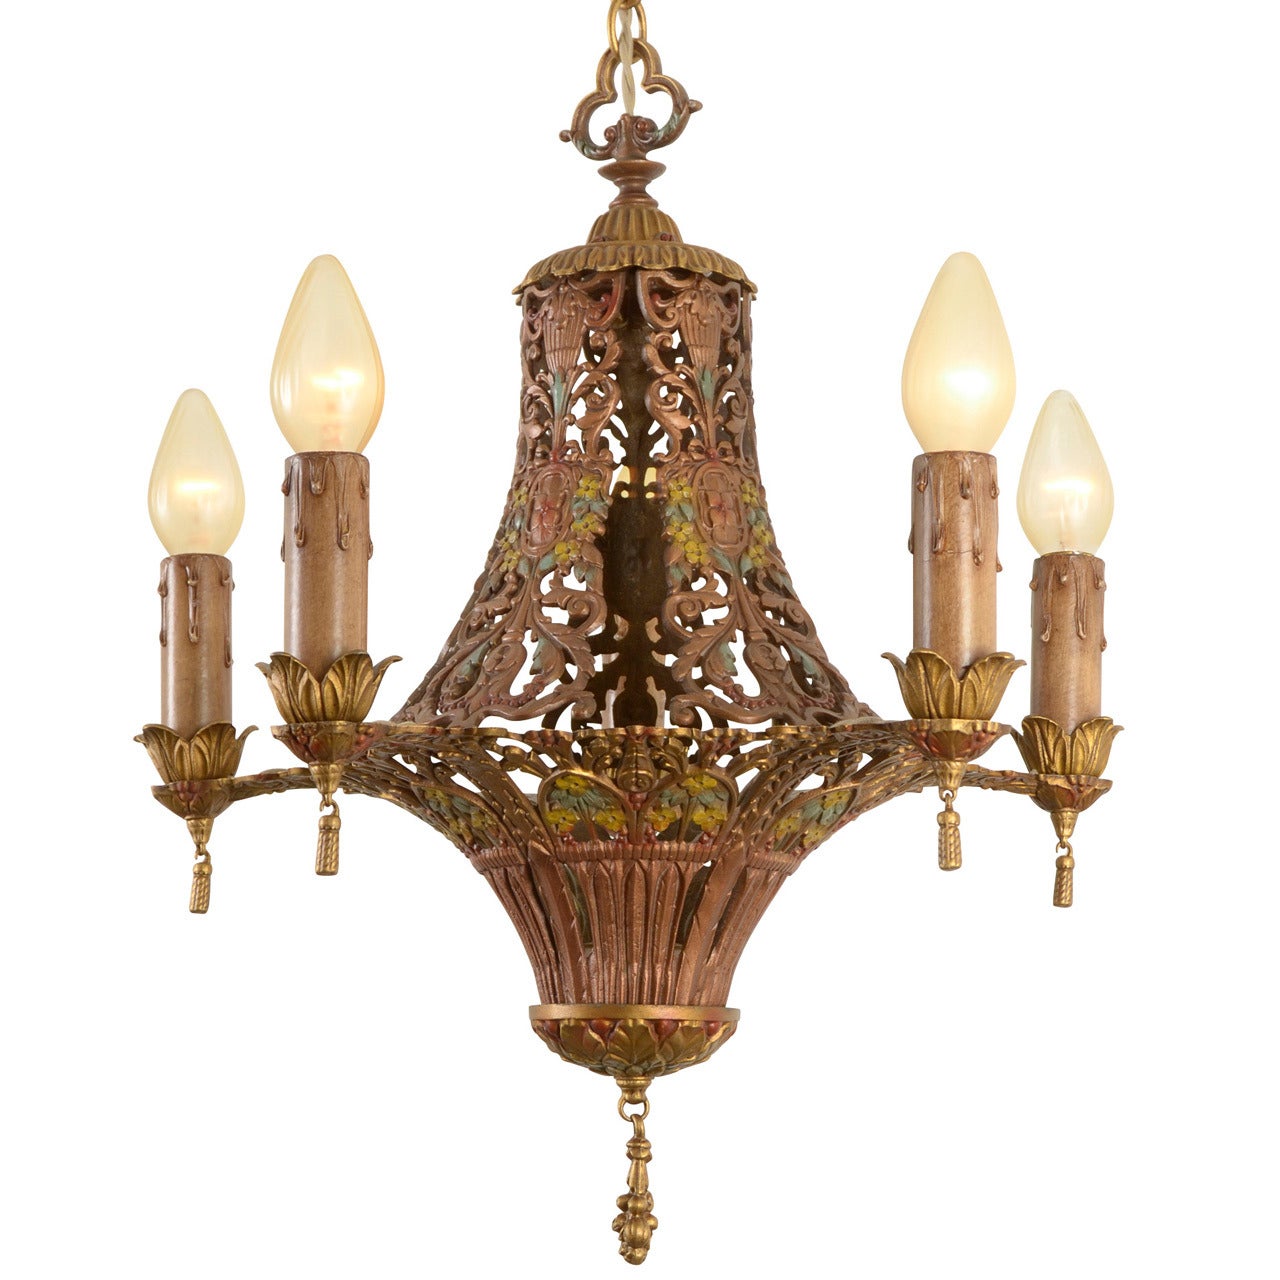 Over-The-Top Floral Chandelier with Original Polychrome, circa 1928